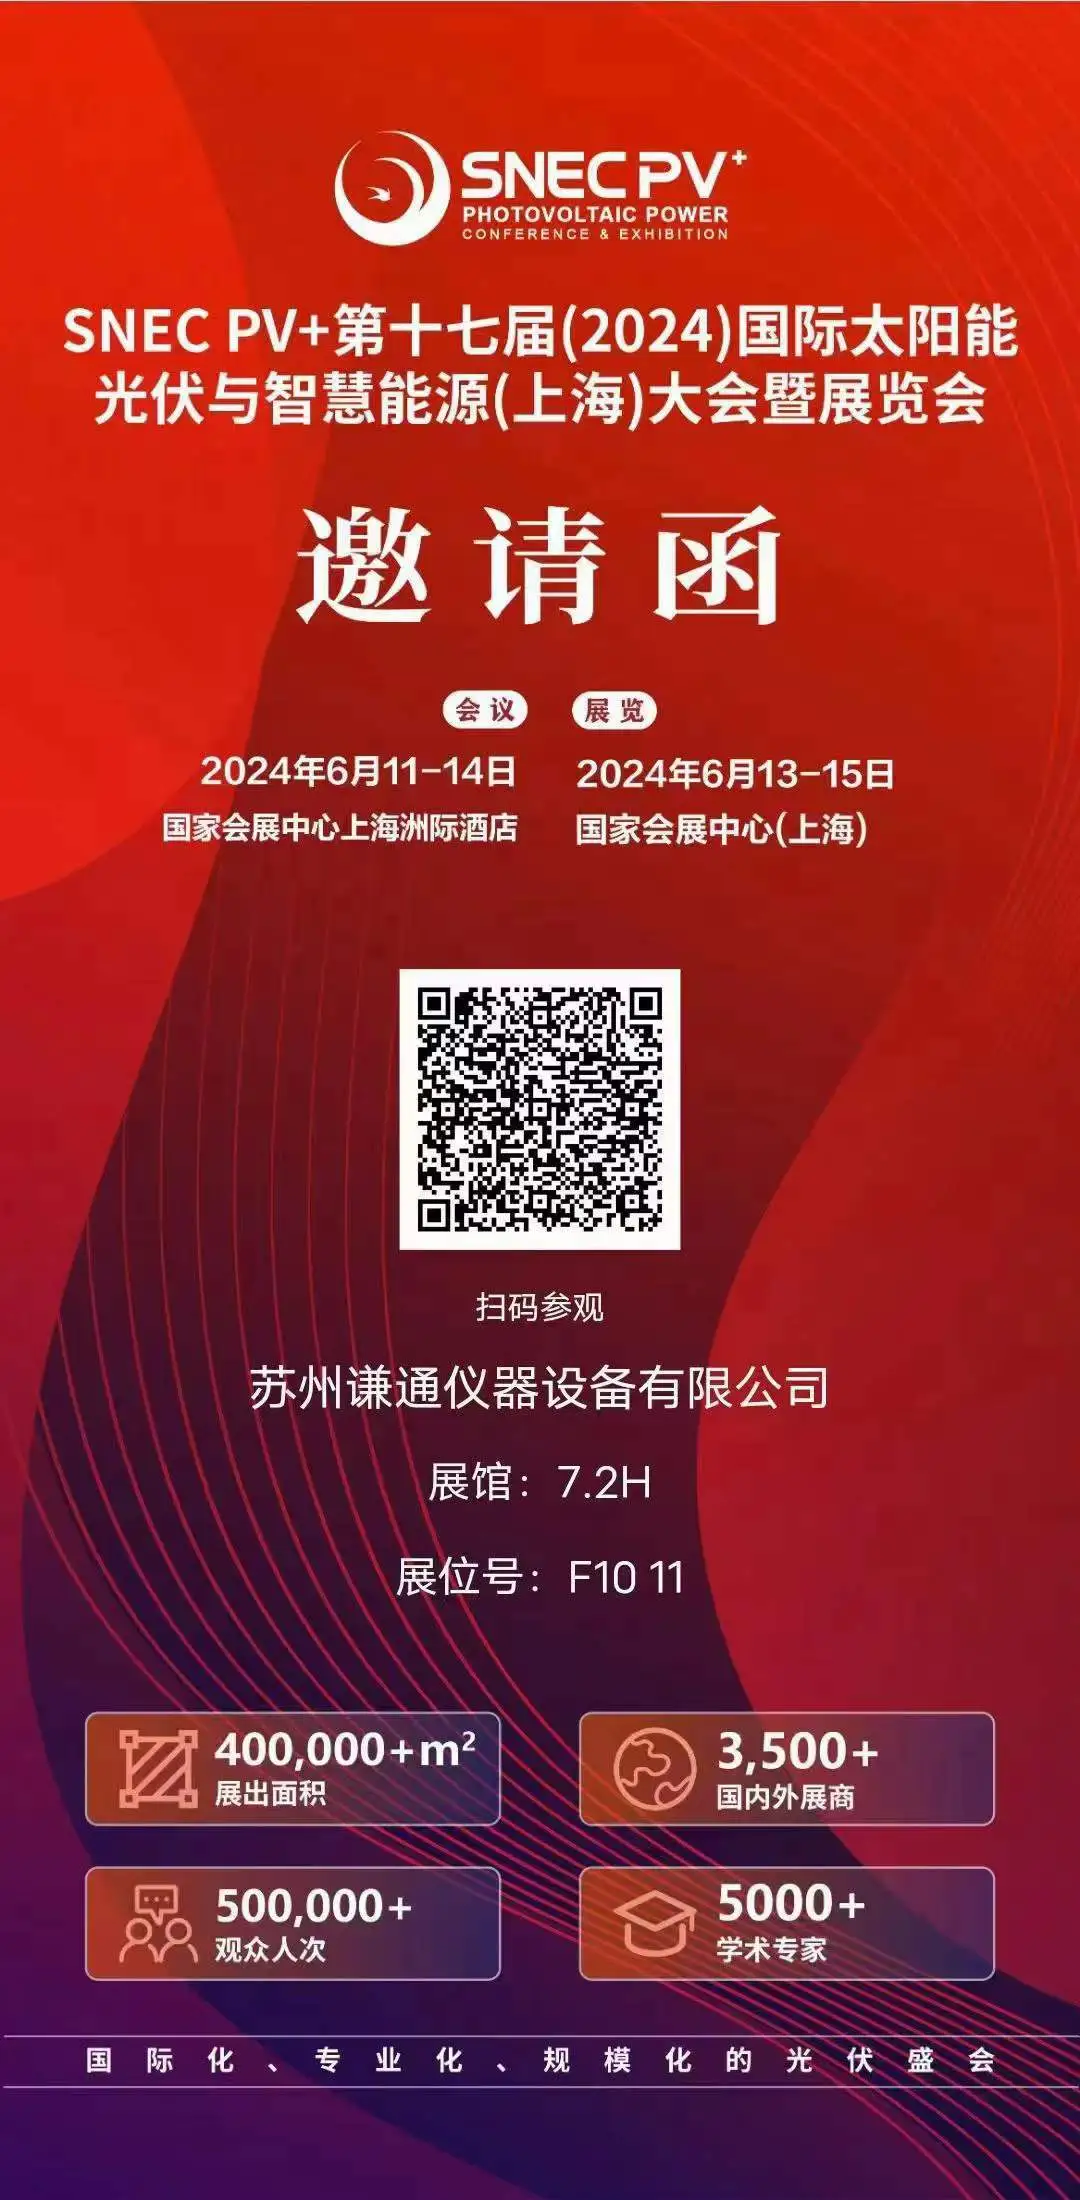 Qiantong will take part in the exhibition SNPV+ 2024